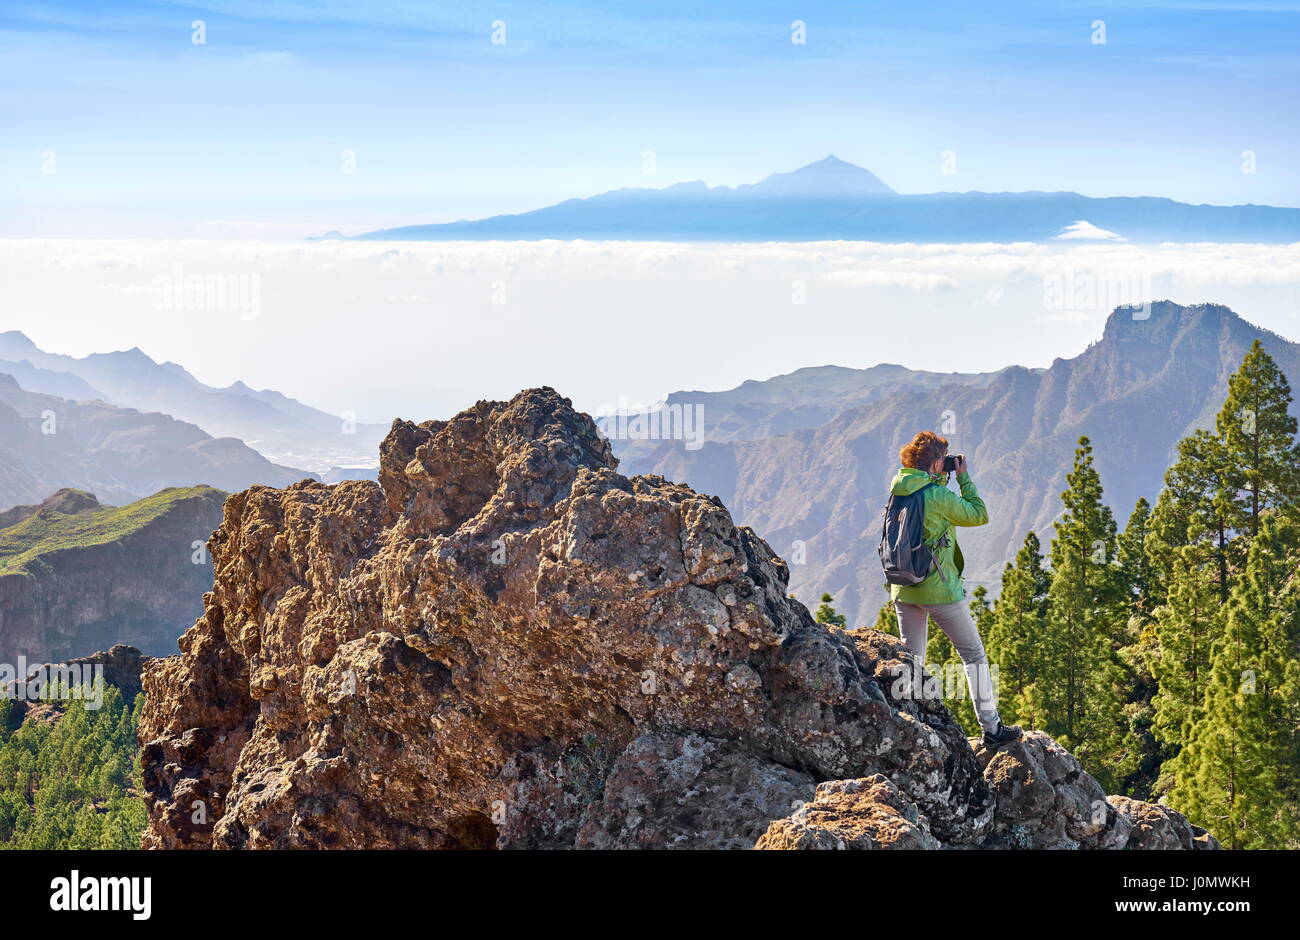 View at Teide Tenerife from Roque Nublo, Gran Canaria, Canary Islands, Spain Stock Photo